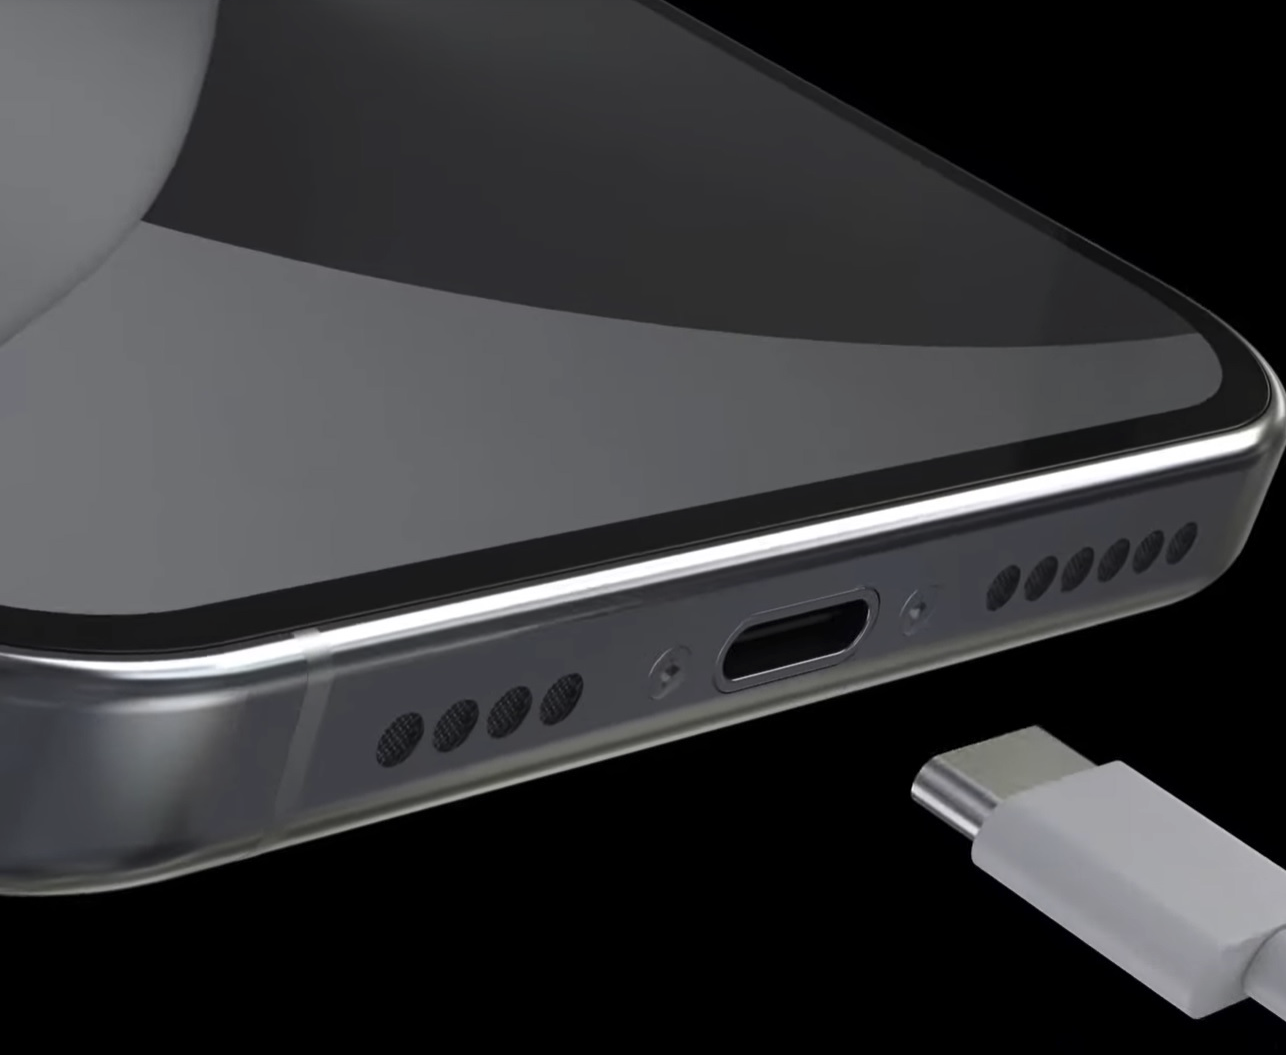 iPhone 15: Apple to launch iPhone 15 with USB type C ports, but